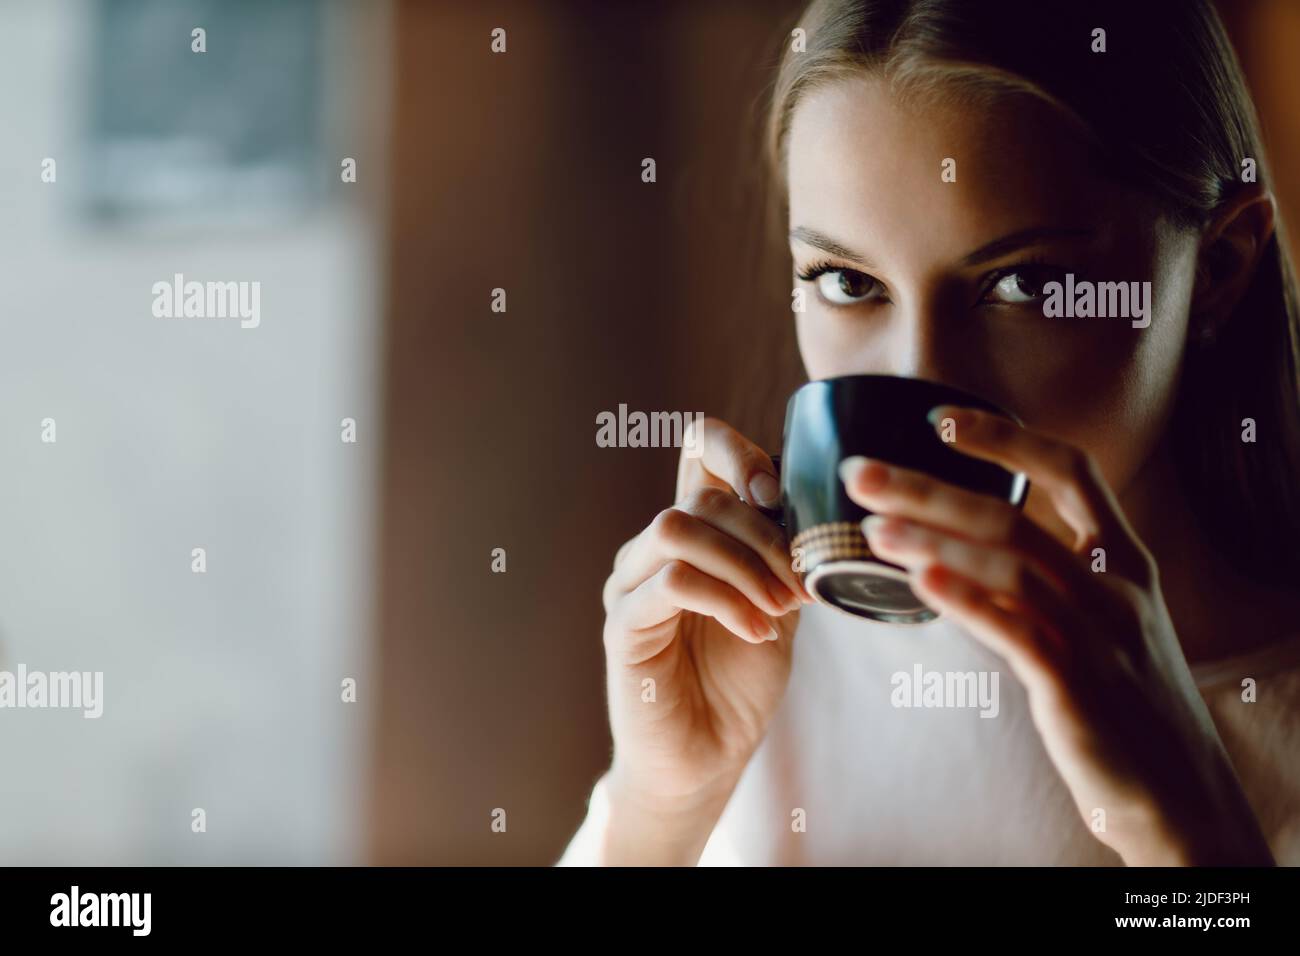 Young beautiful smiling woman enjoying drinking cappuccino coffee cup indoor cafe looking camera. Tea or coffee drink. Stock Photo